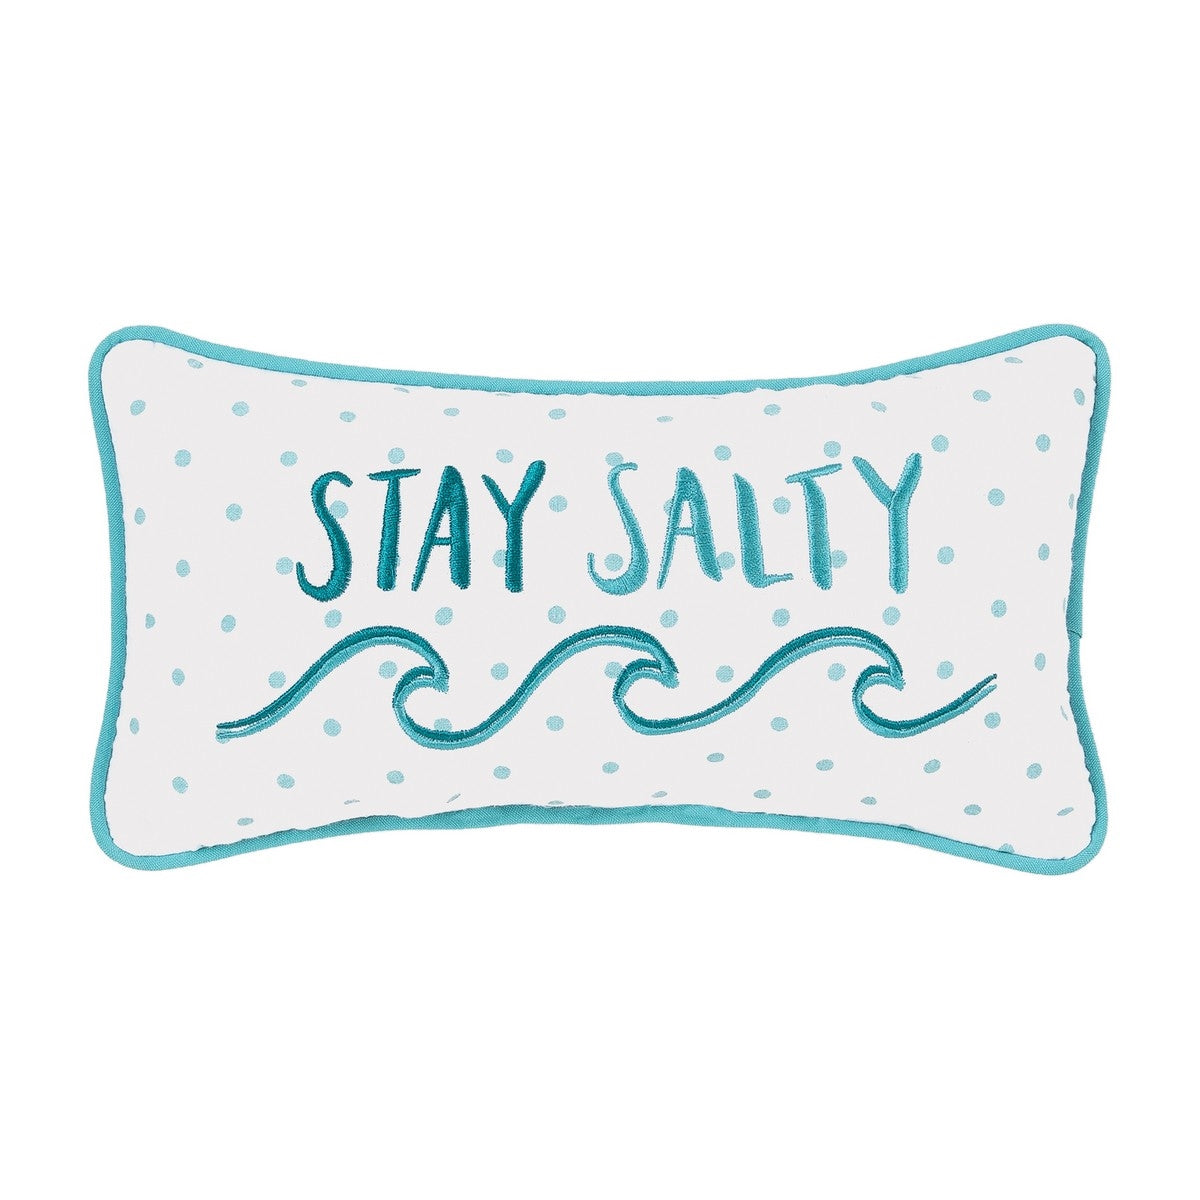 Stay Salty - 6"x9" Pillow    